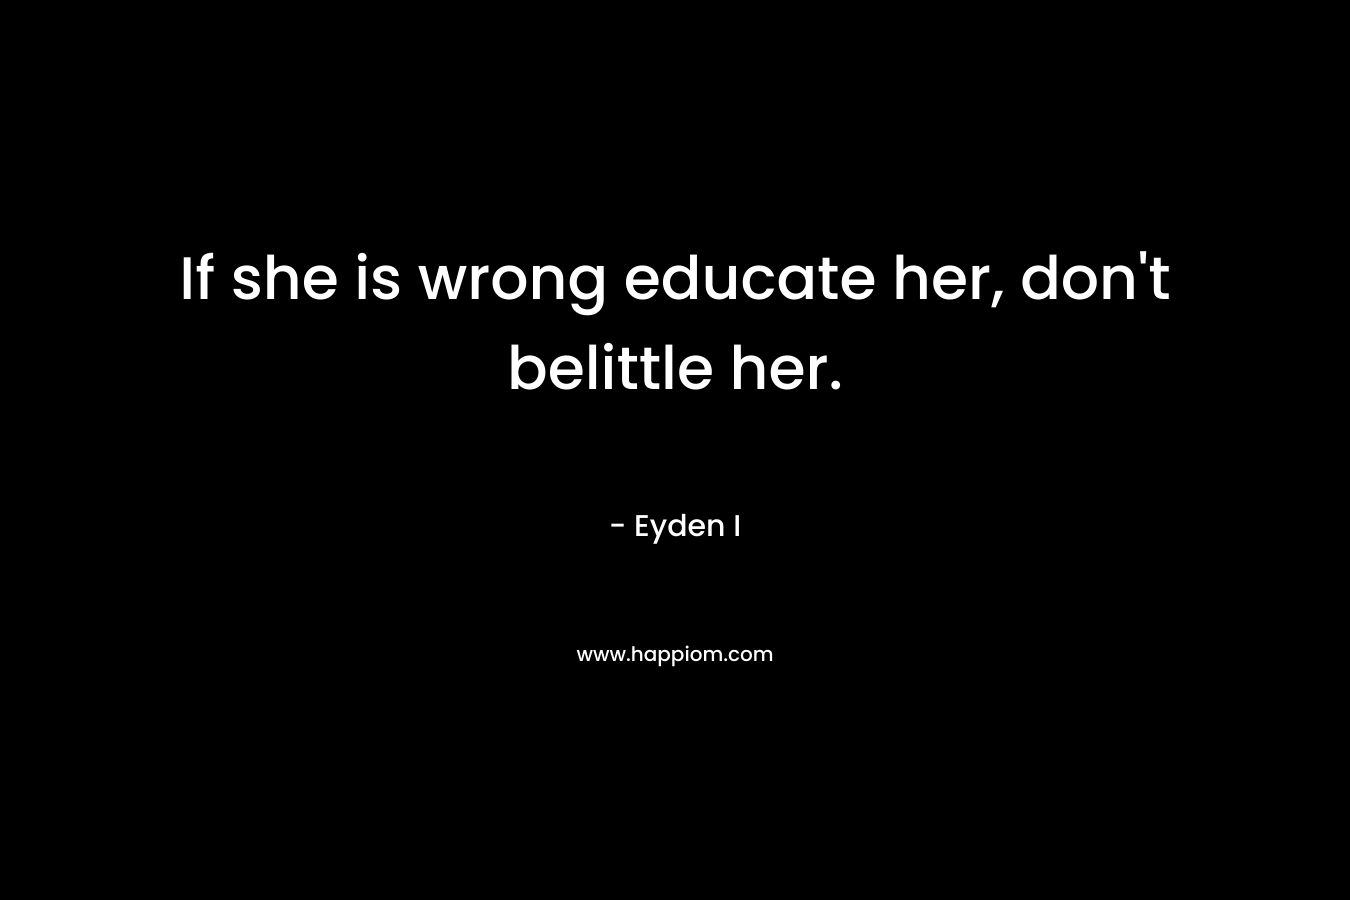 If she is wrong educate her, don’t belittle her. – Eyden I